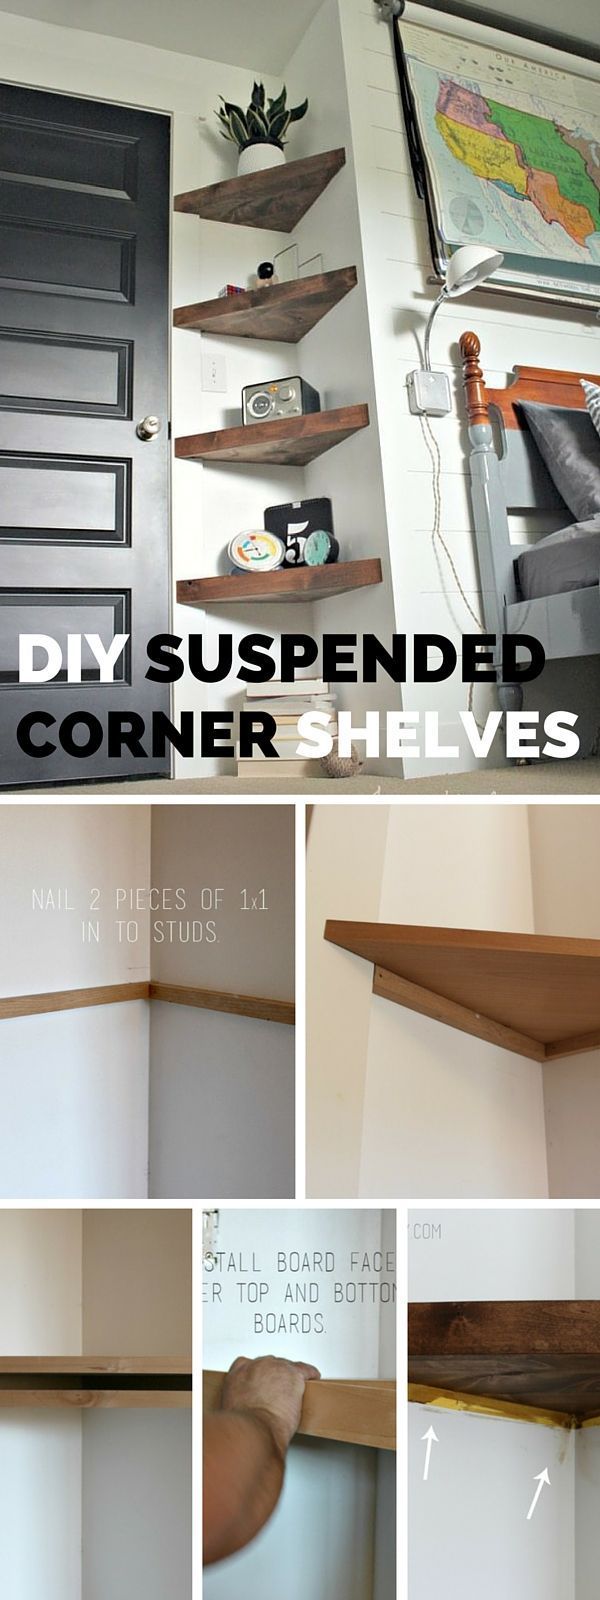 awesome 12 Simply Genius DIY Storage Solutions for a Neat Home by www.top10-home-d